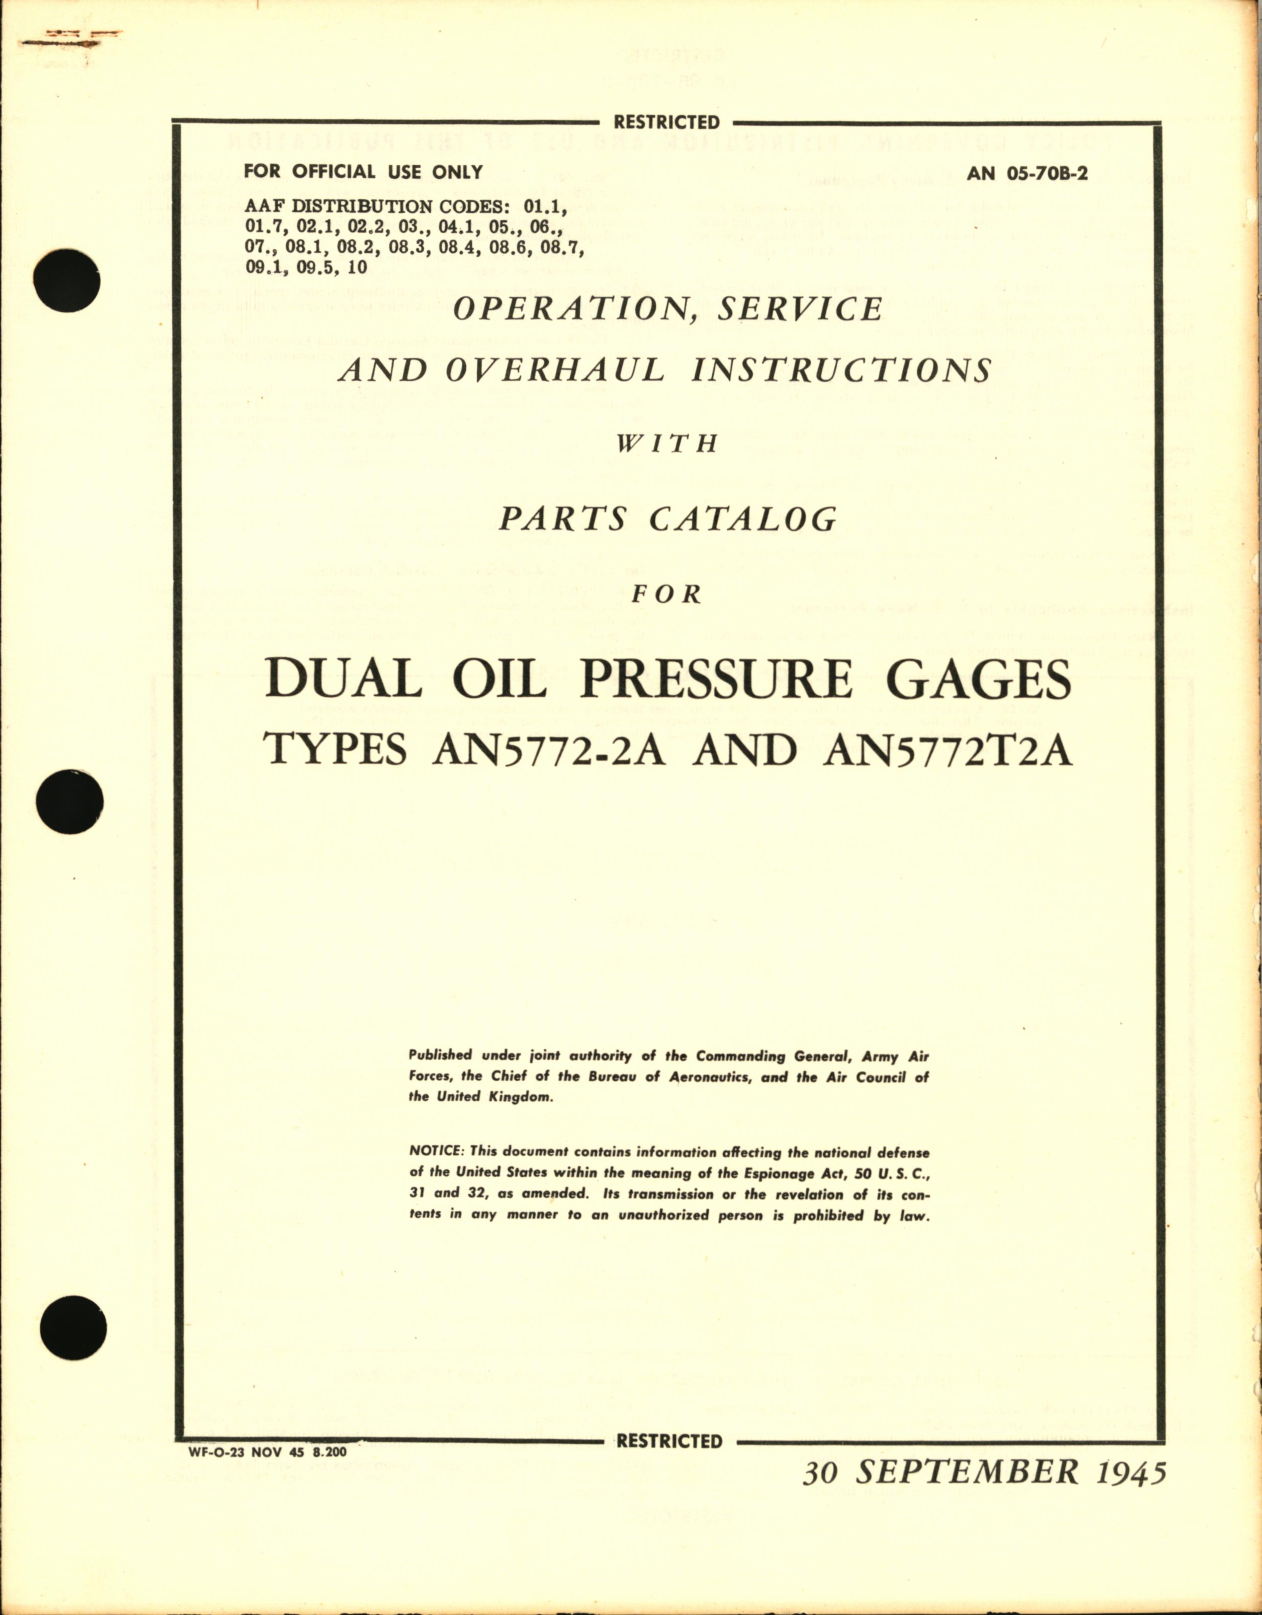 Sample page 1 from AirCorps Library document: Operation, Service, & Overhaul Instructions with Parts Catalog for Dual Oil Pressure Gages